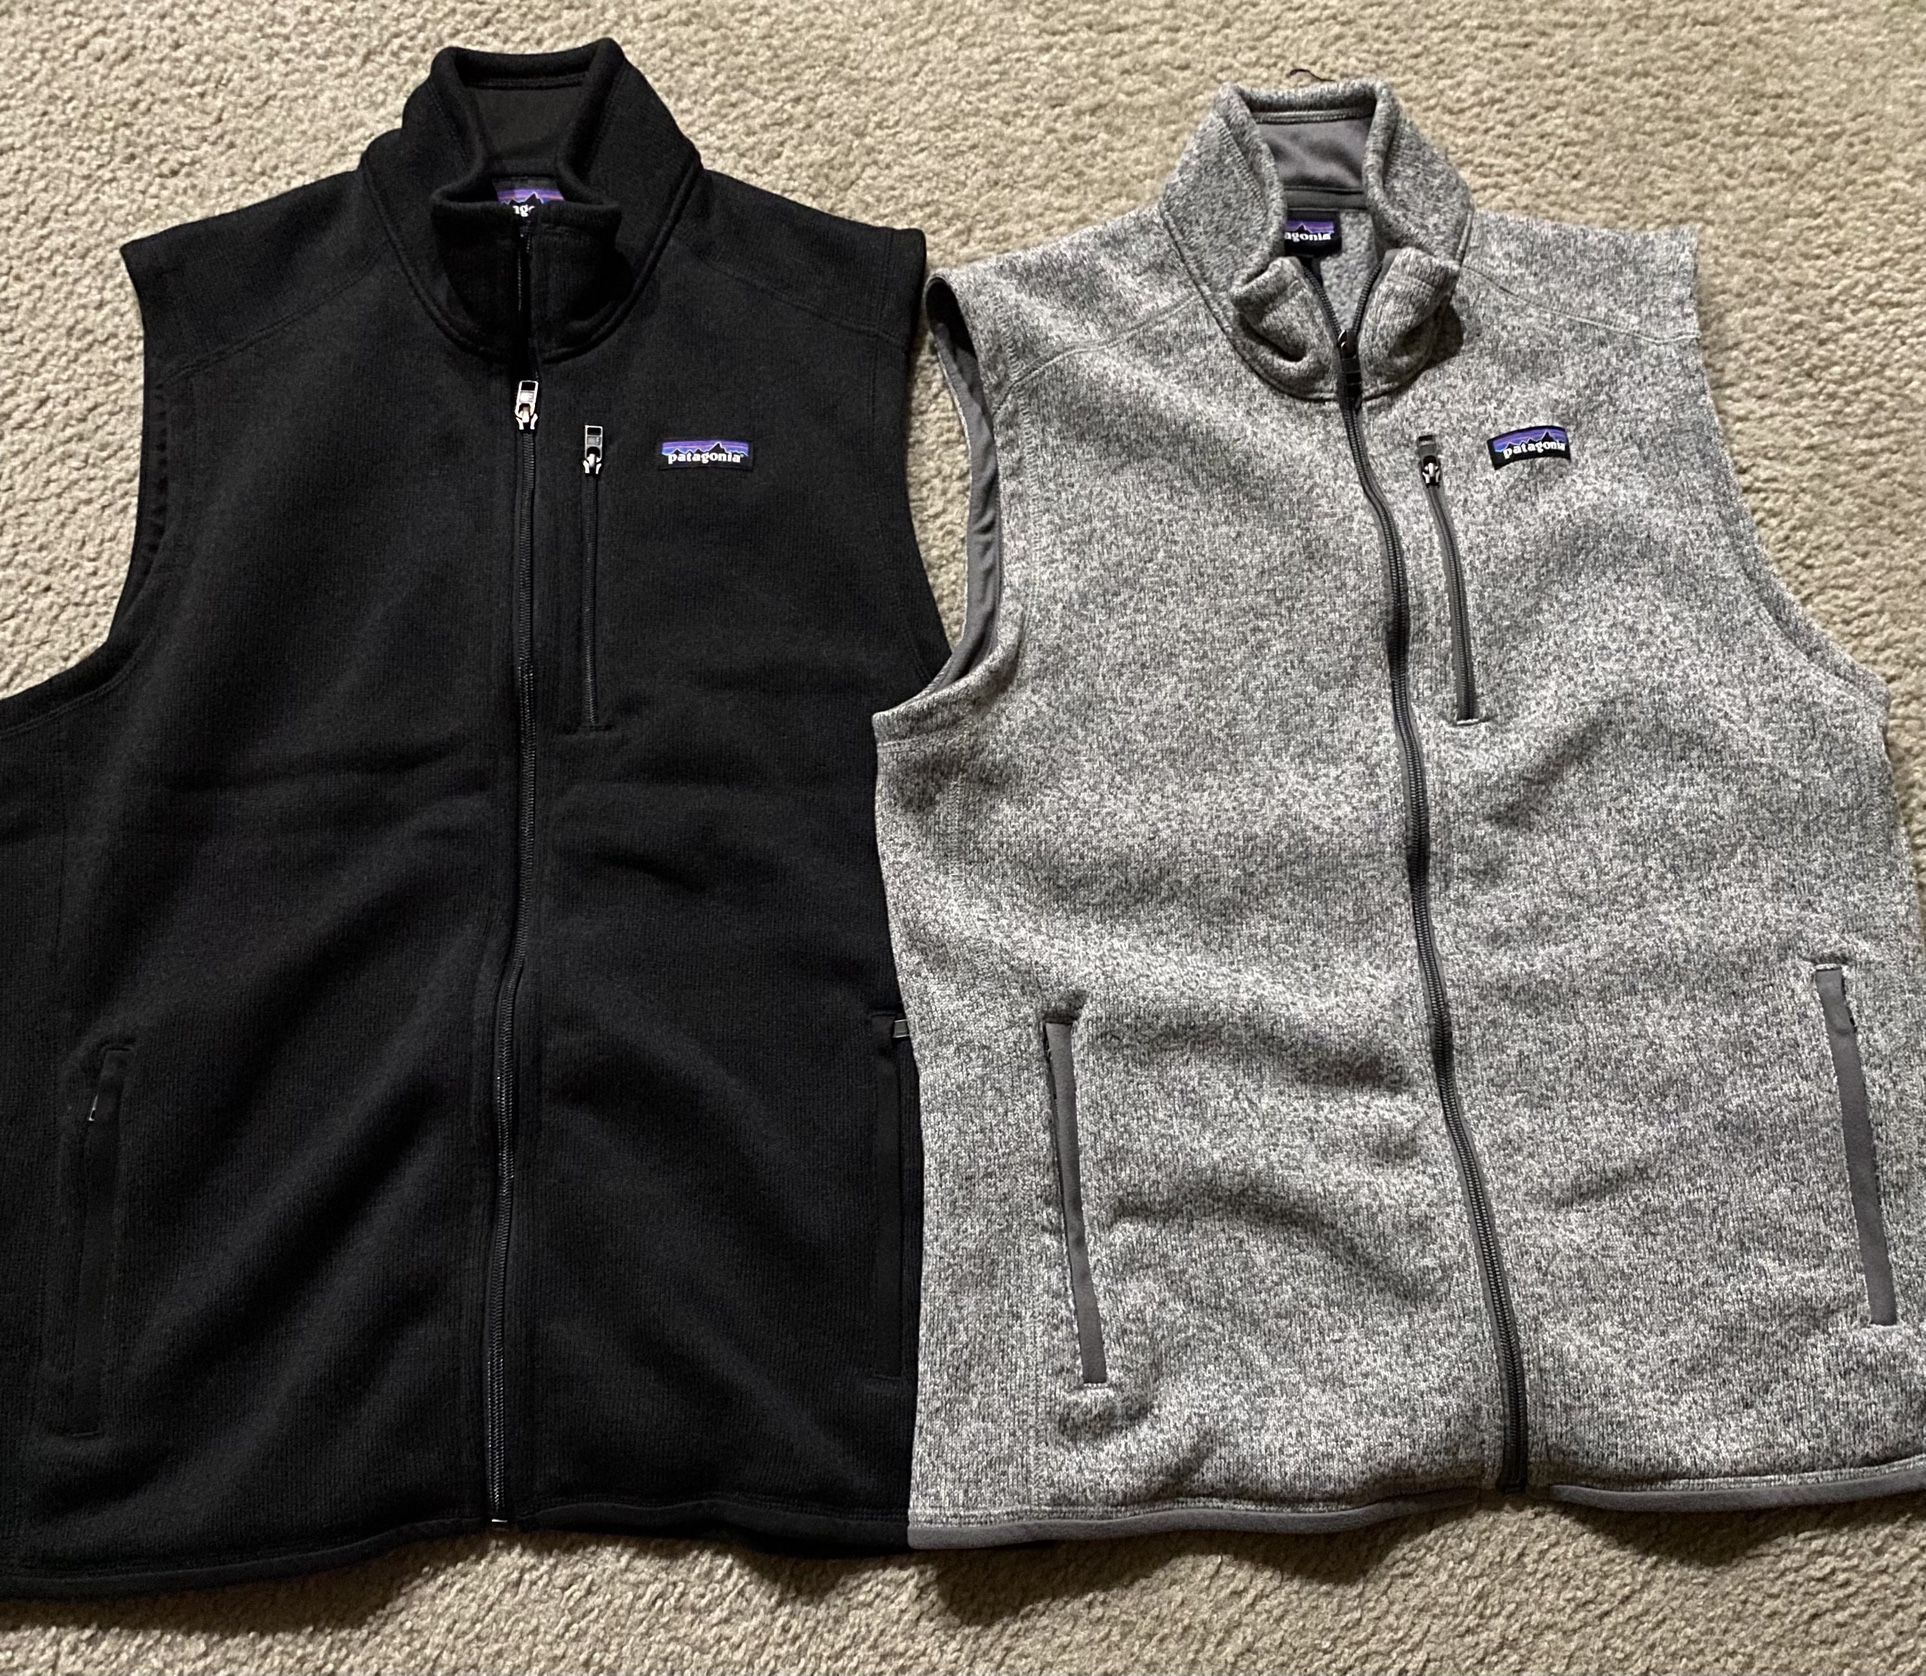 2 Patagonia Better sweater Vest Size L  Never Worn! Excellent Condition 